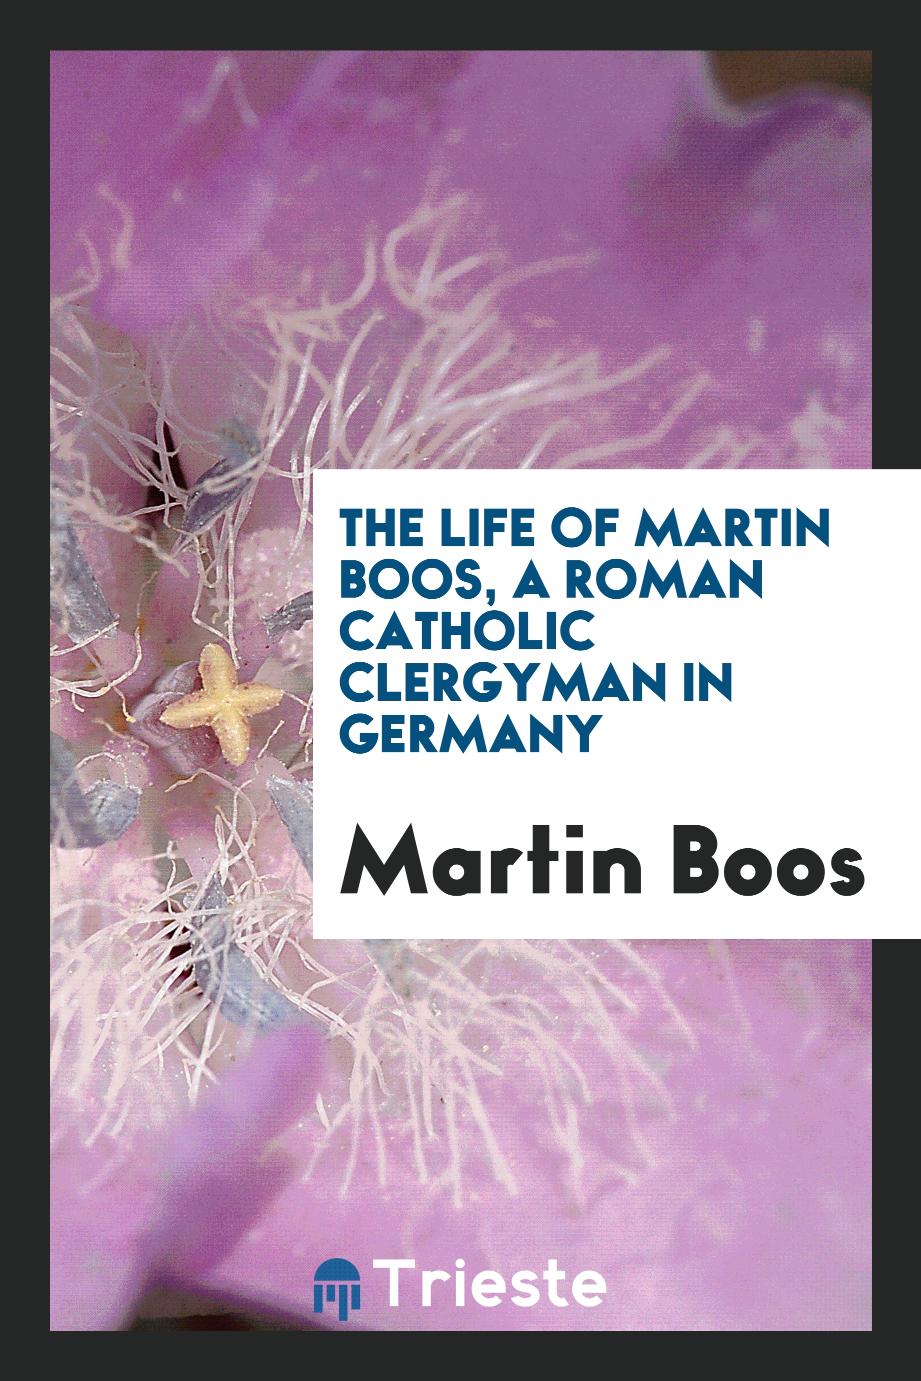 The Life of Martin Boos, a Roman Catholic Clergyman in Germany